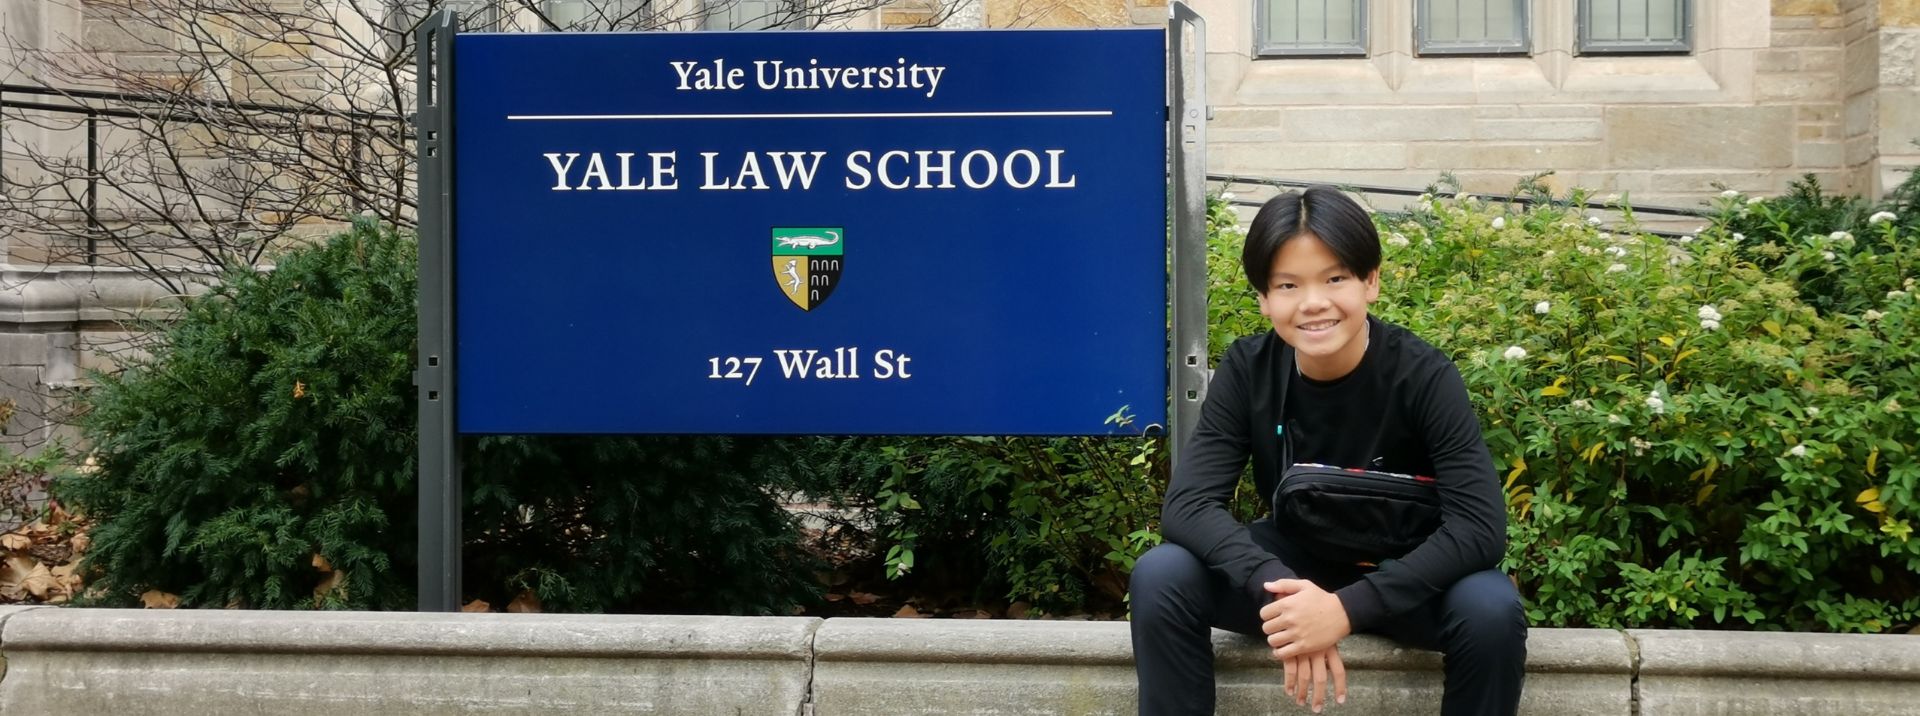   Rugby School Thailand wins silver and gold at World Scholars in Yale